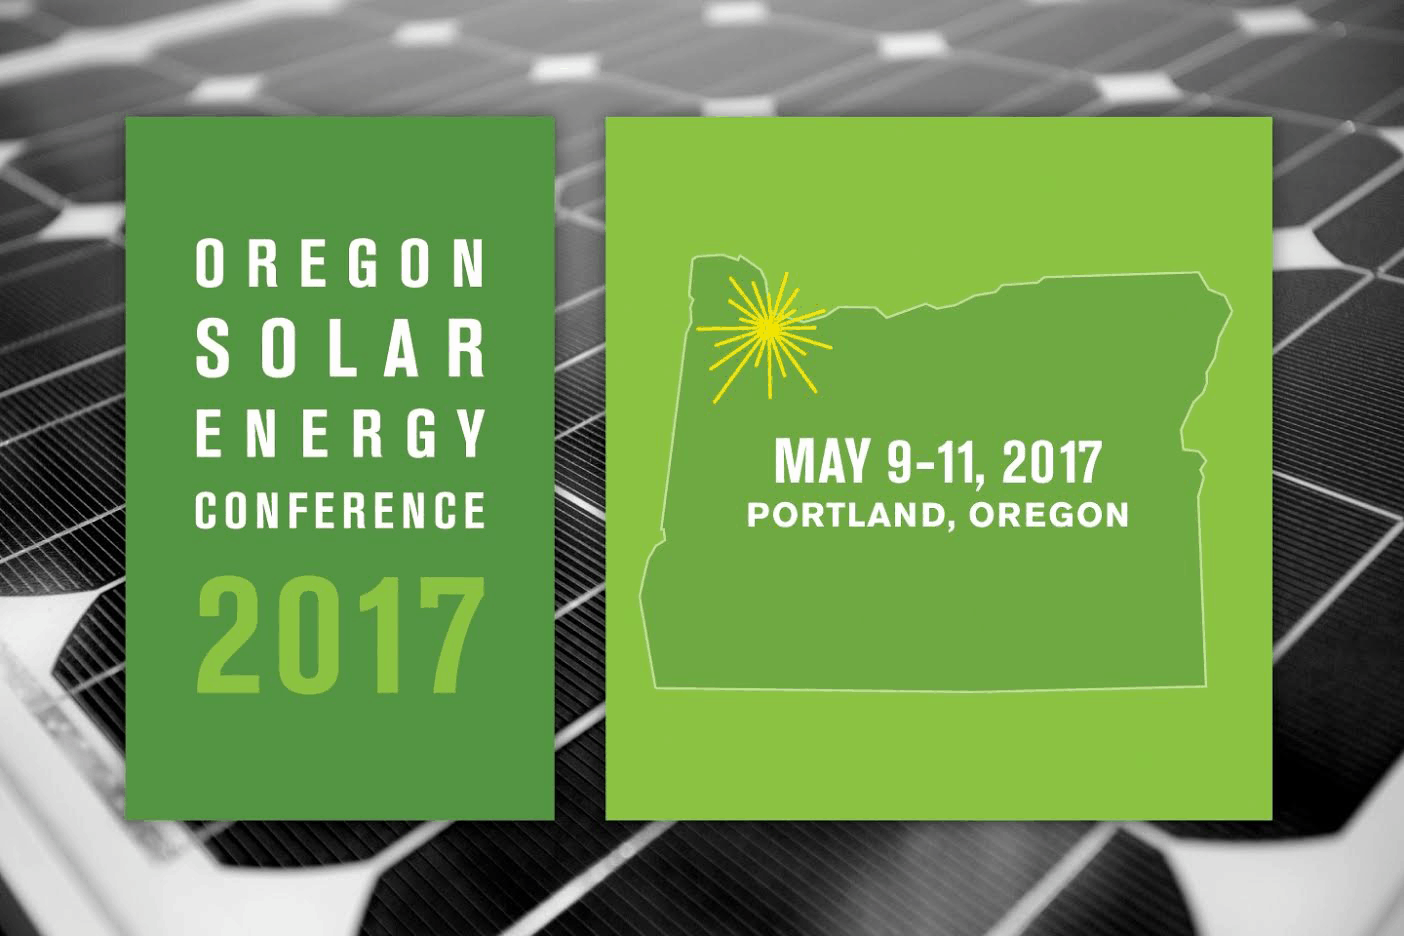 Solar panels in the background with 2017 Oregon Solar Energy Conference dates